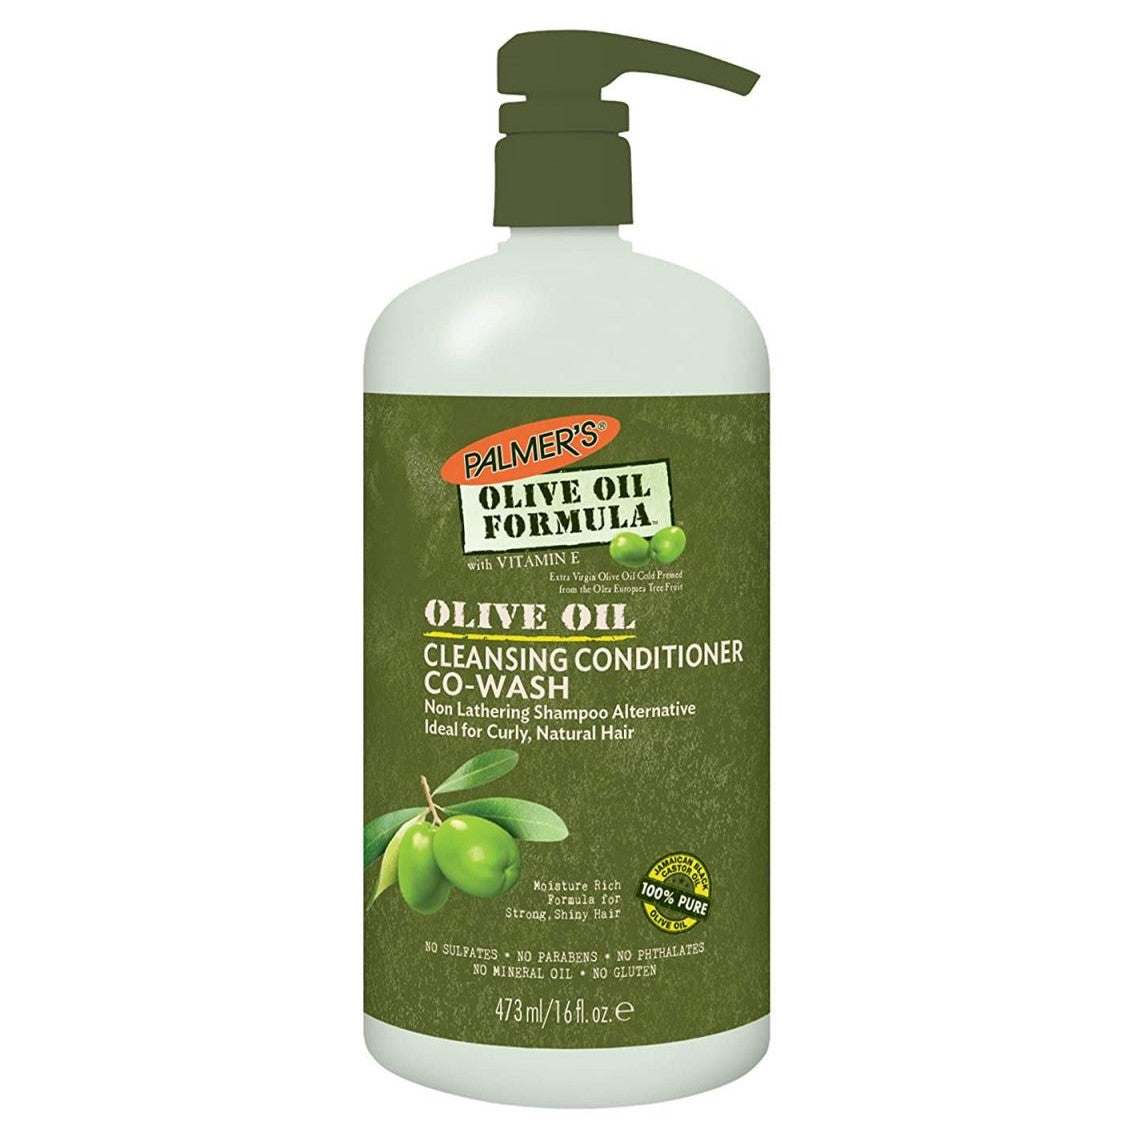 Palmers Olive Oil Formula Co-Wash Cleansing Conditioner 473ml